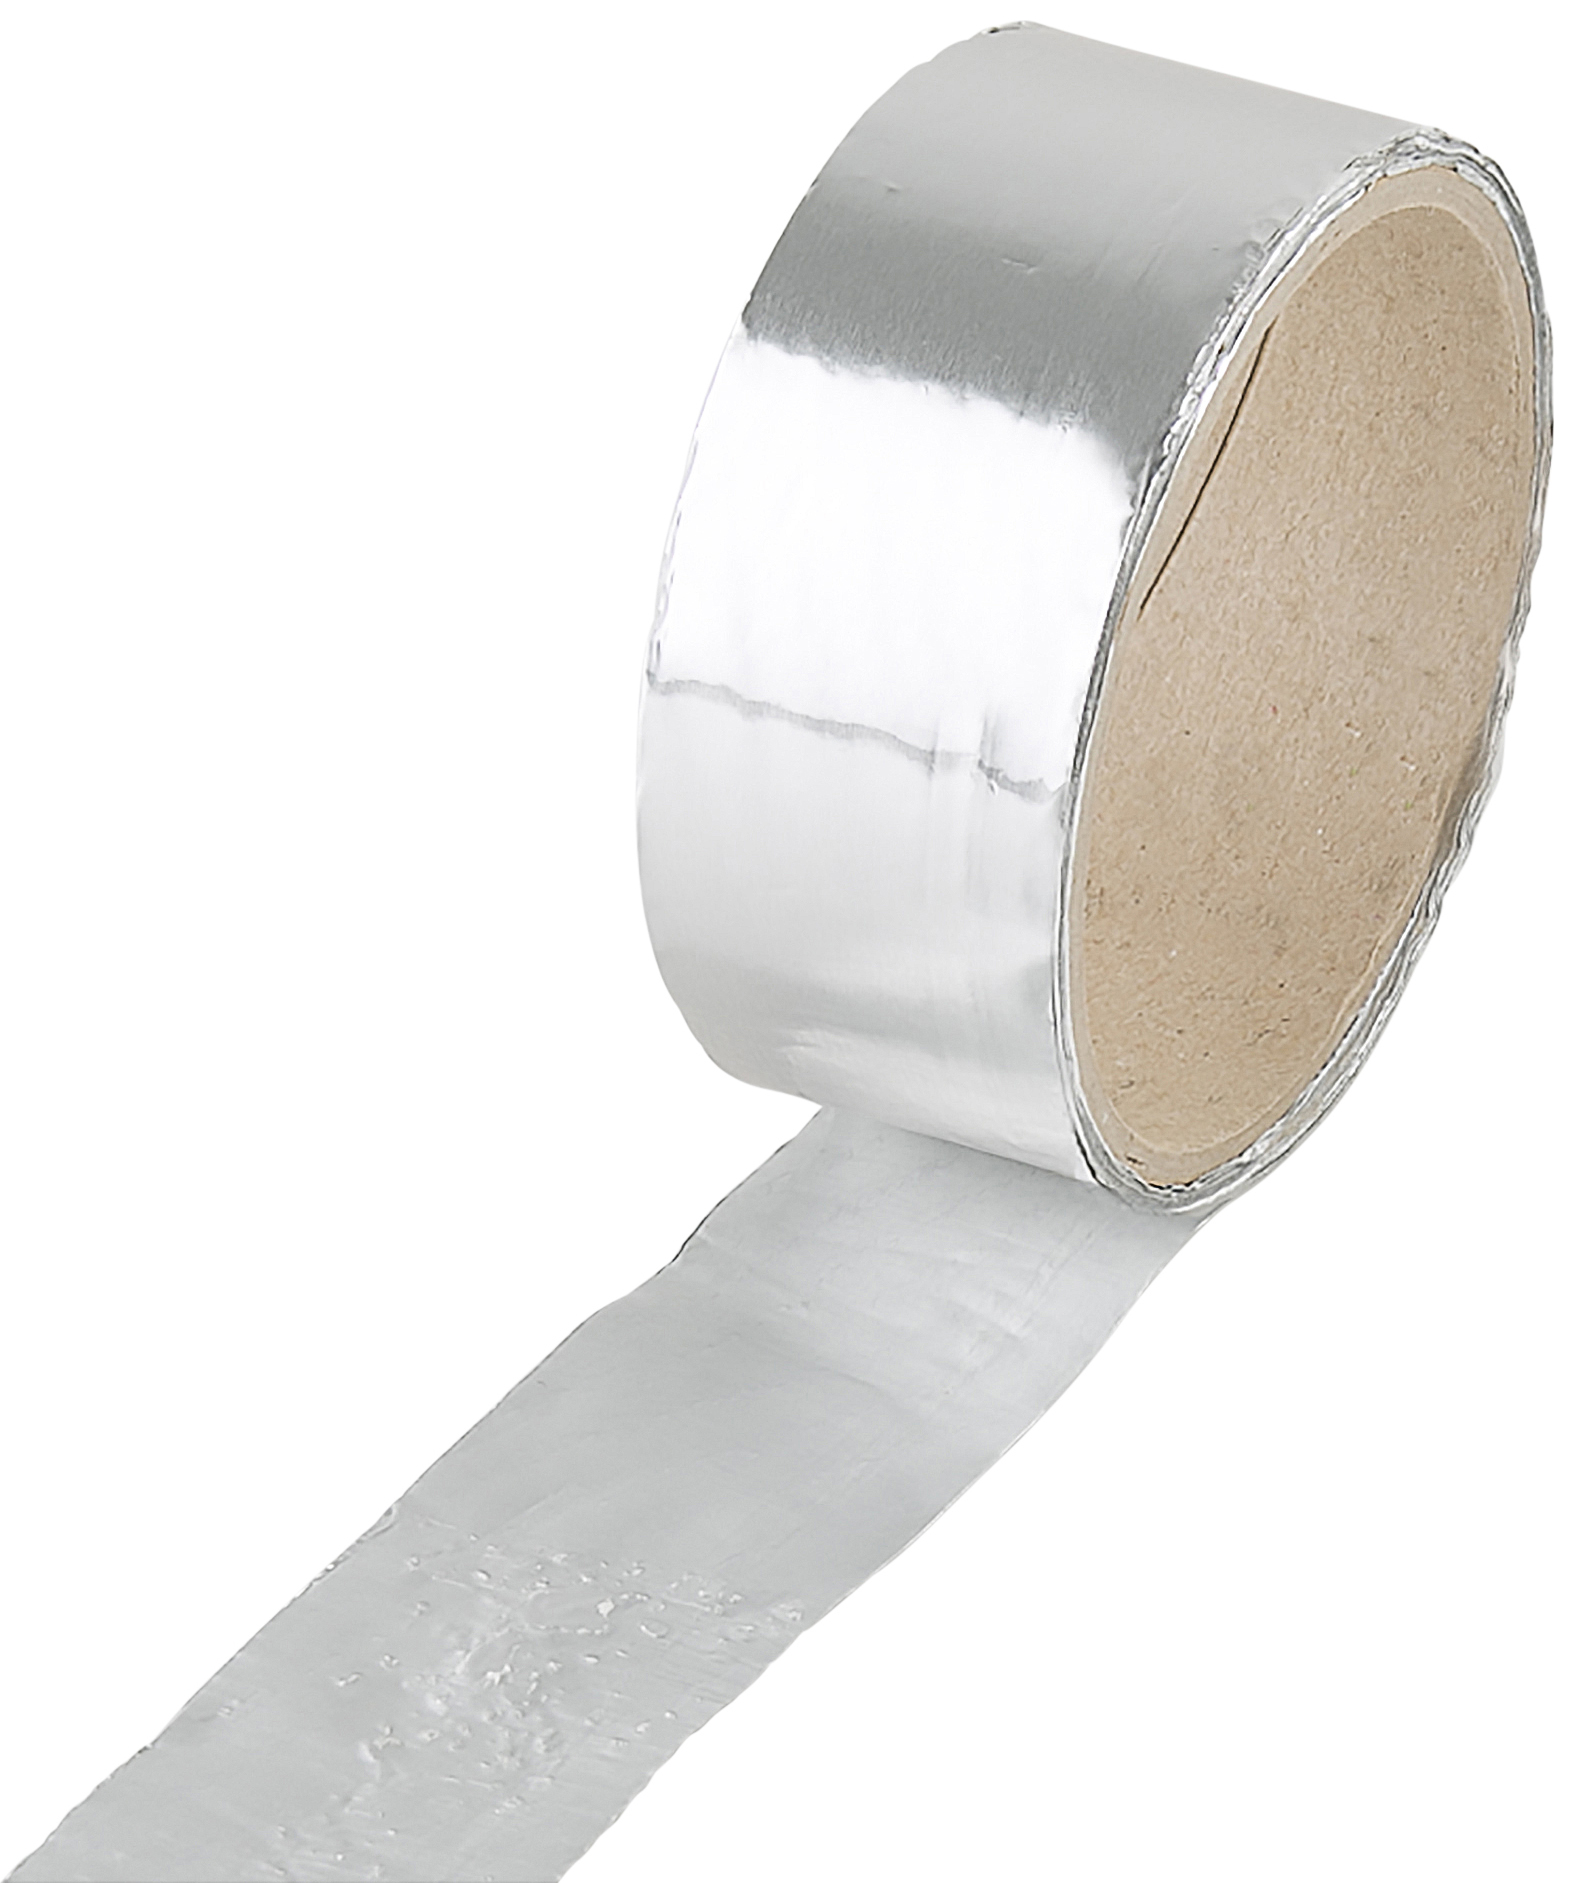 10mm Polycarbonate Sheet Solid Tape - 25mm x 10m